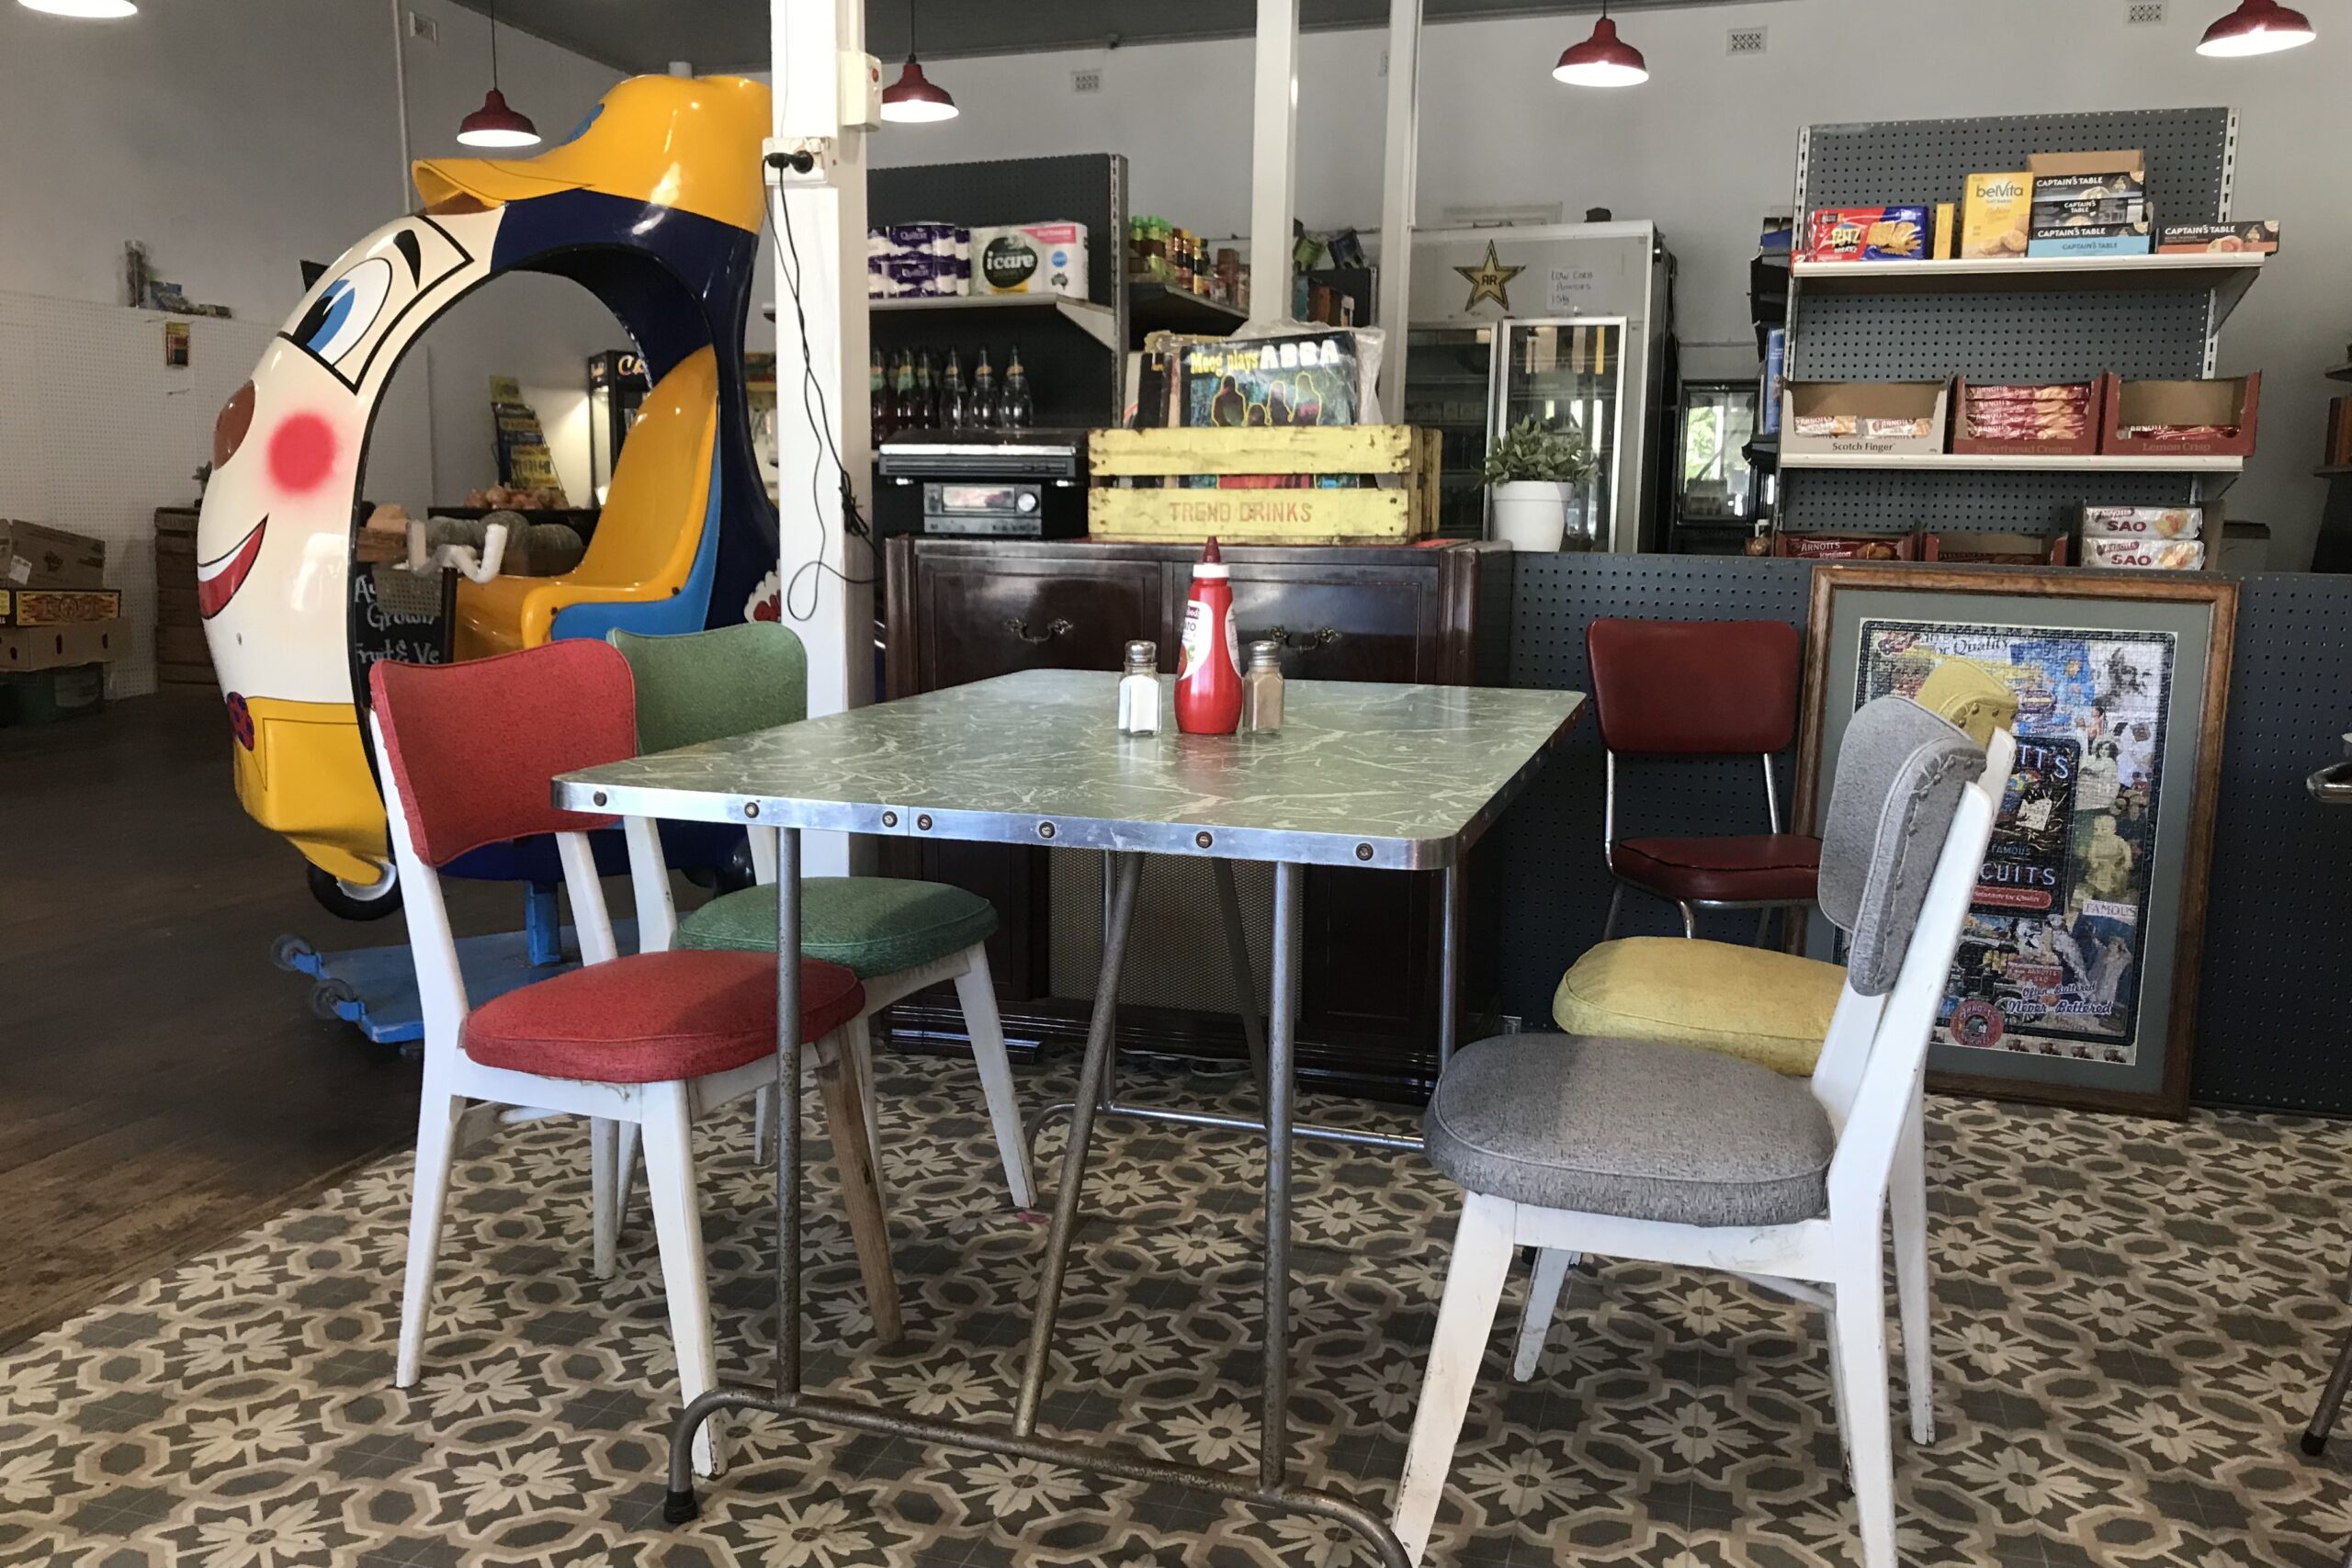 Formica table and Abba albums live on in rural South Australia